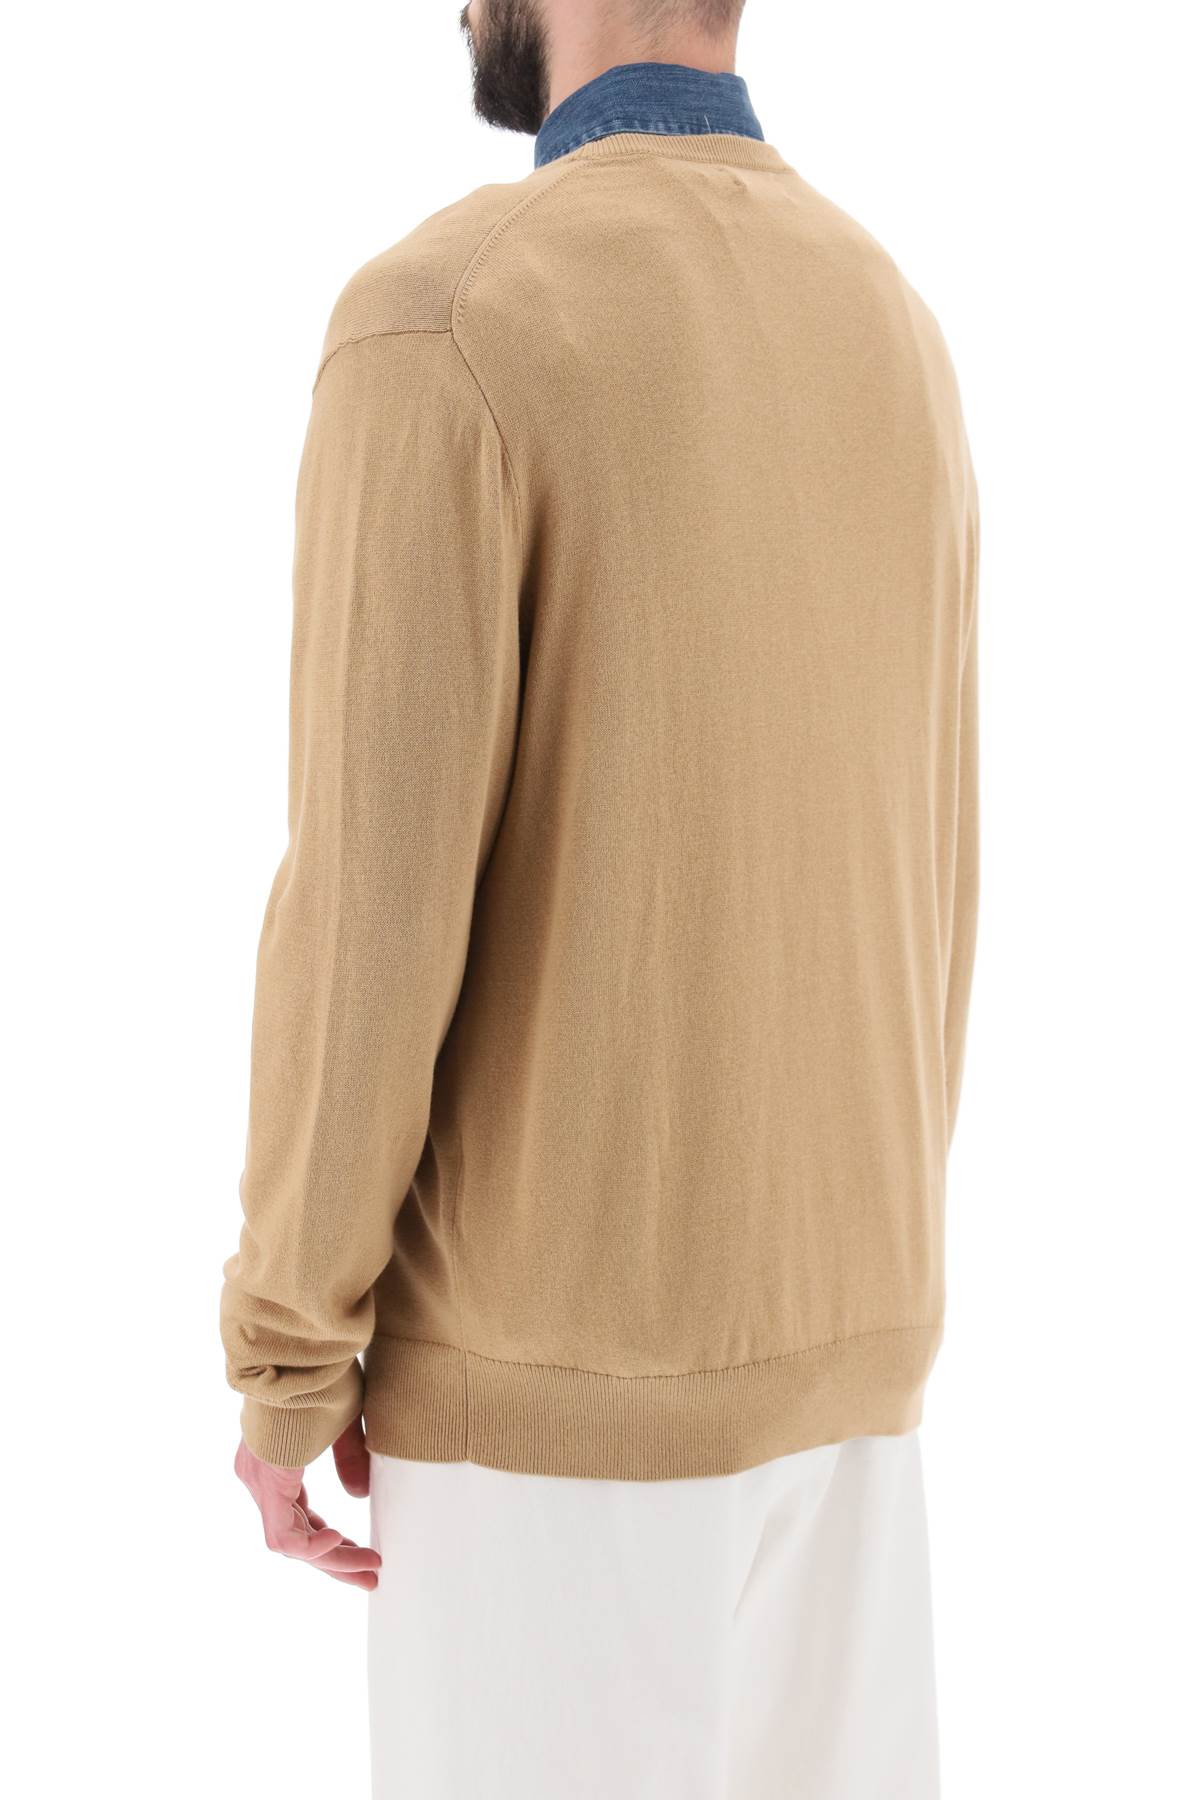 Shop Polo Ralph Lauren Sweater In Cotton And Cashmere In Burlap Tan (beige)